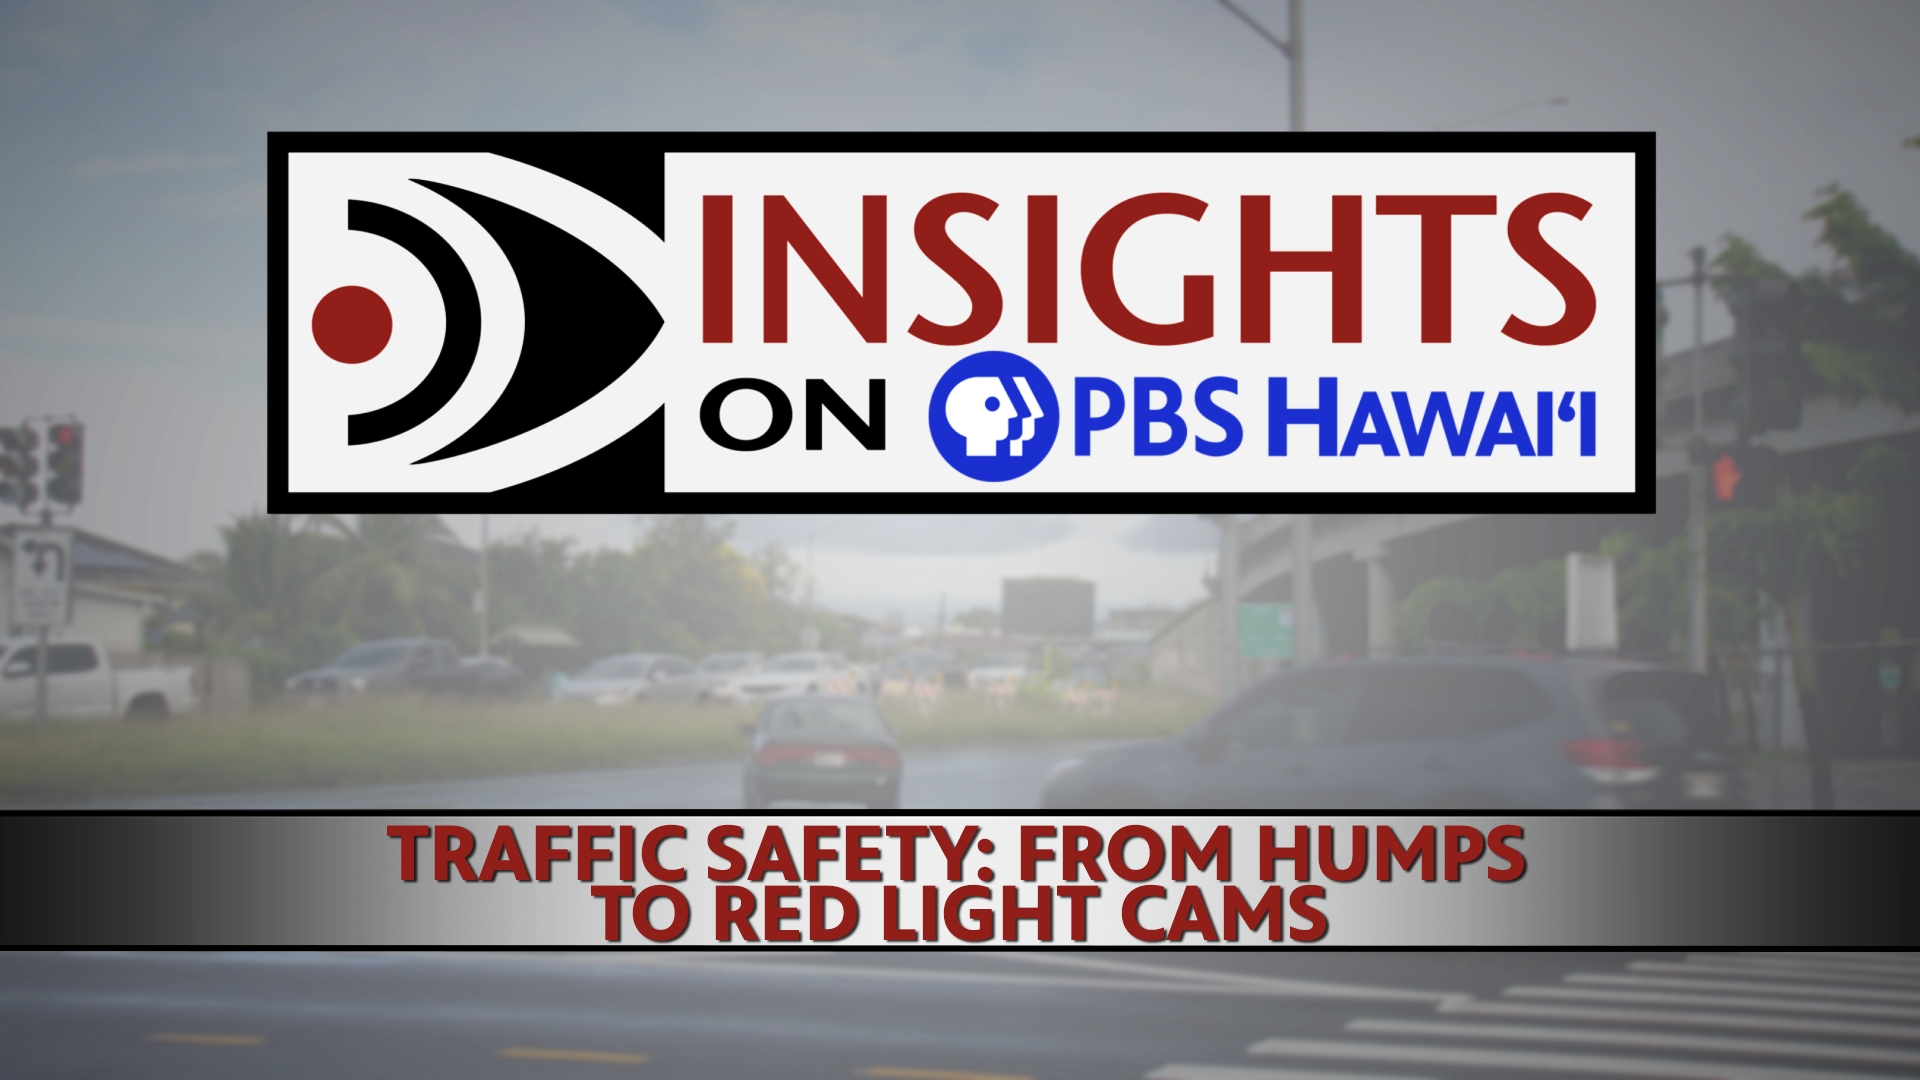 INSIGHTS ON PBS HAWAIʻI <br/>TRAFFIC SAFETY: FROM HUMPS TO RED LIGHT CAMS